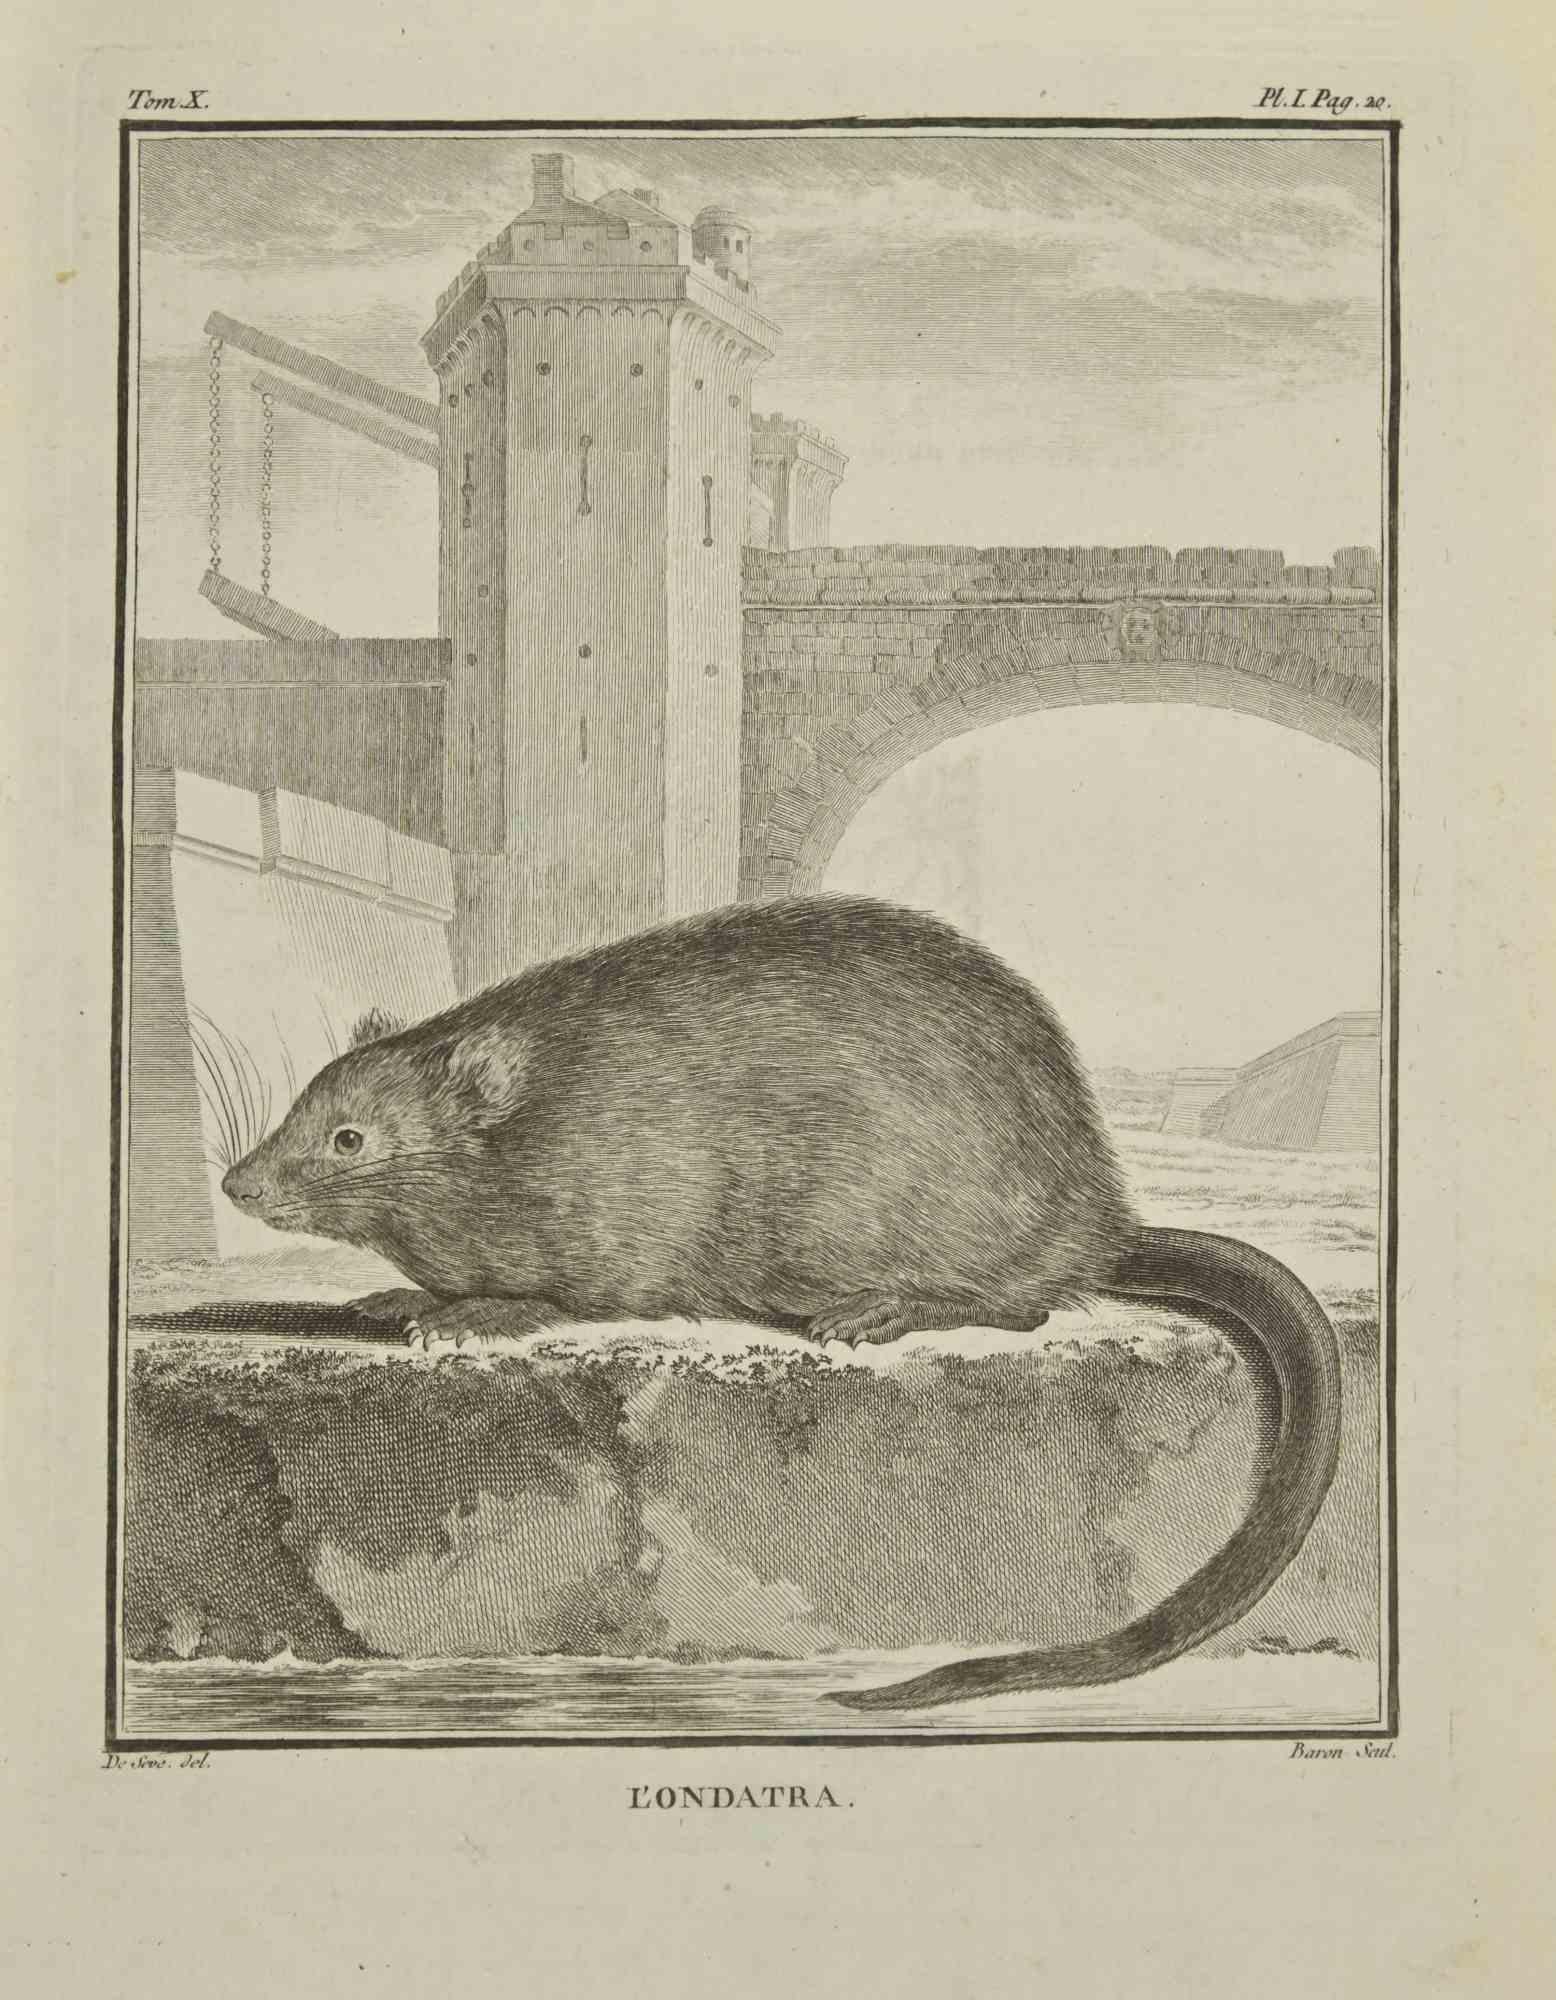 L'Ondatra is an etching realized by Jacques Baron in 1771.

It belongs to the suite "Histoire Naturelle de Buffon".

The Artist's signature is engraved lower right.

Good conditions.